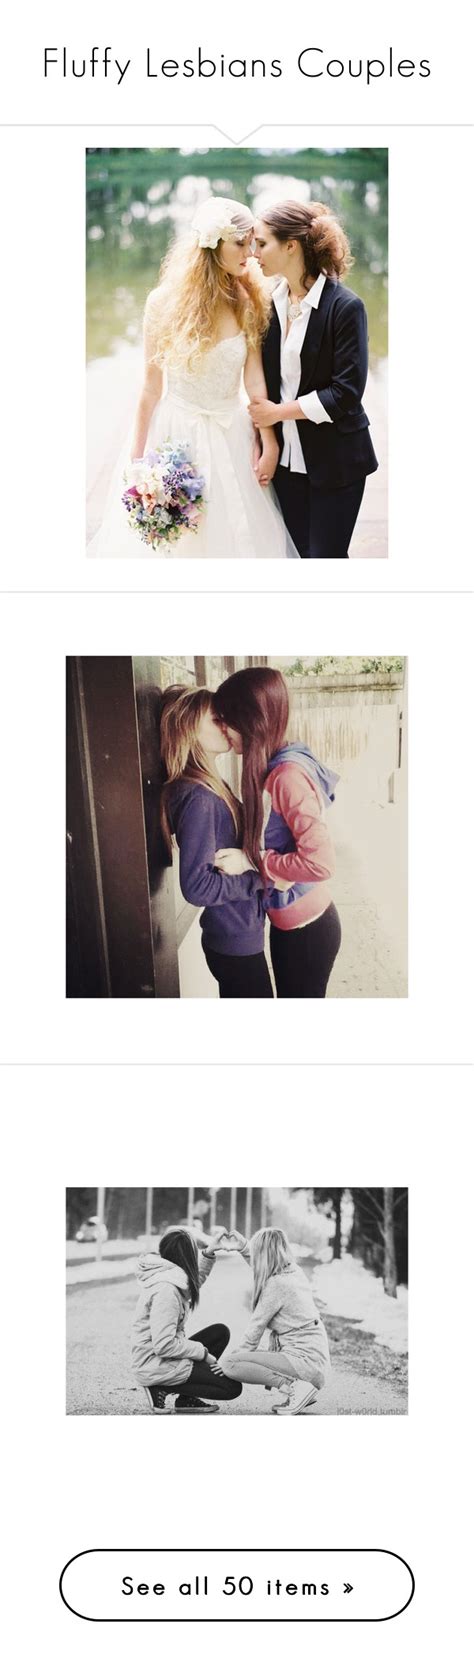 Fluffy Lesbians Couples By Samara Missschmidt Liked On Polyvore Featuring Couples Backgrounds